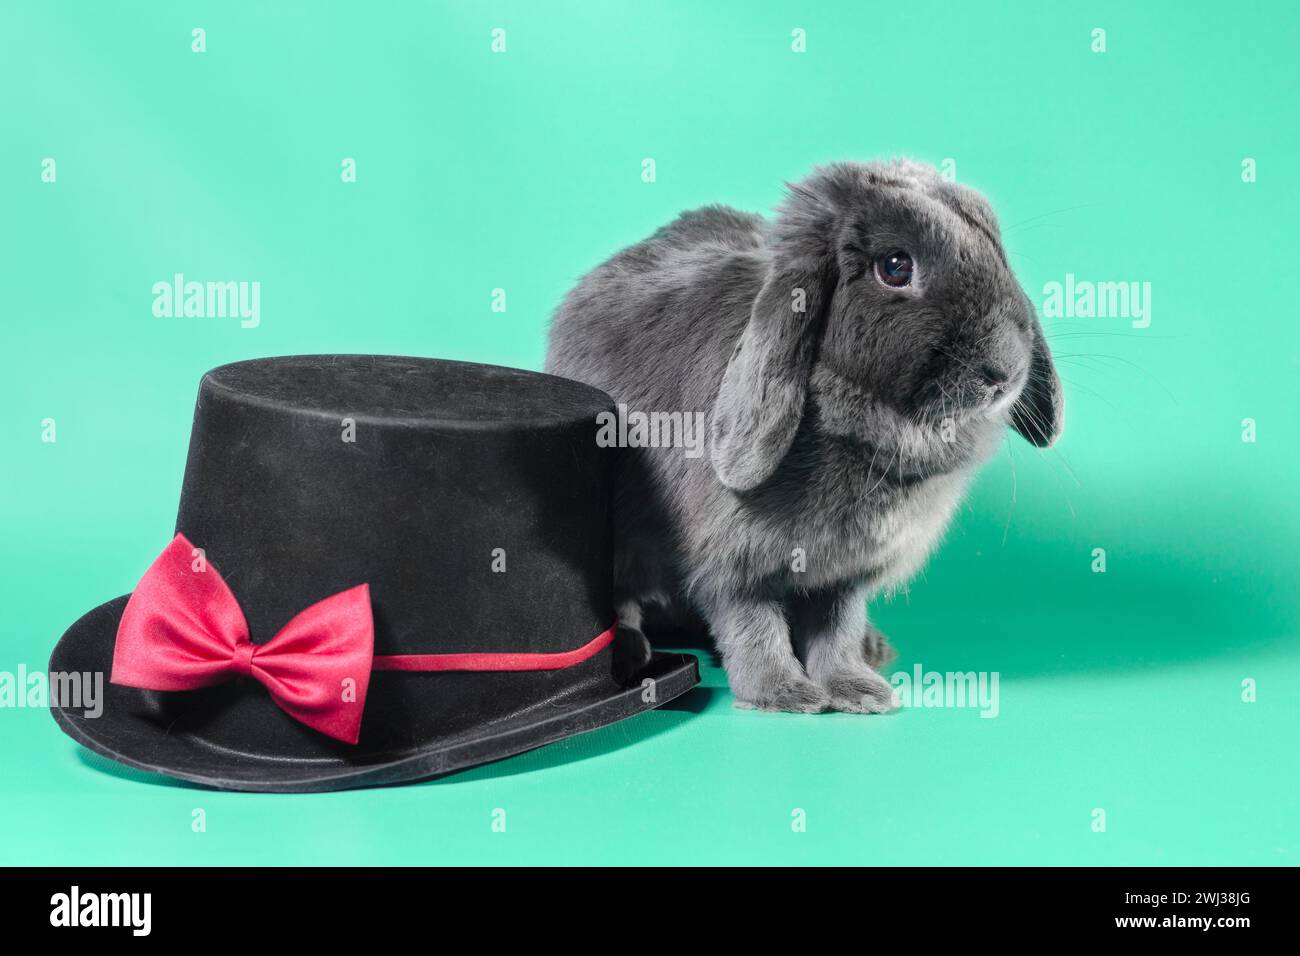 Lop-eared dwarf rabbit next to a black cylinder hat on a green background Stock Photo